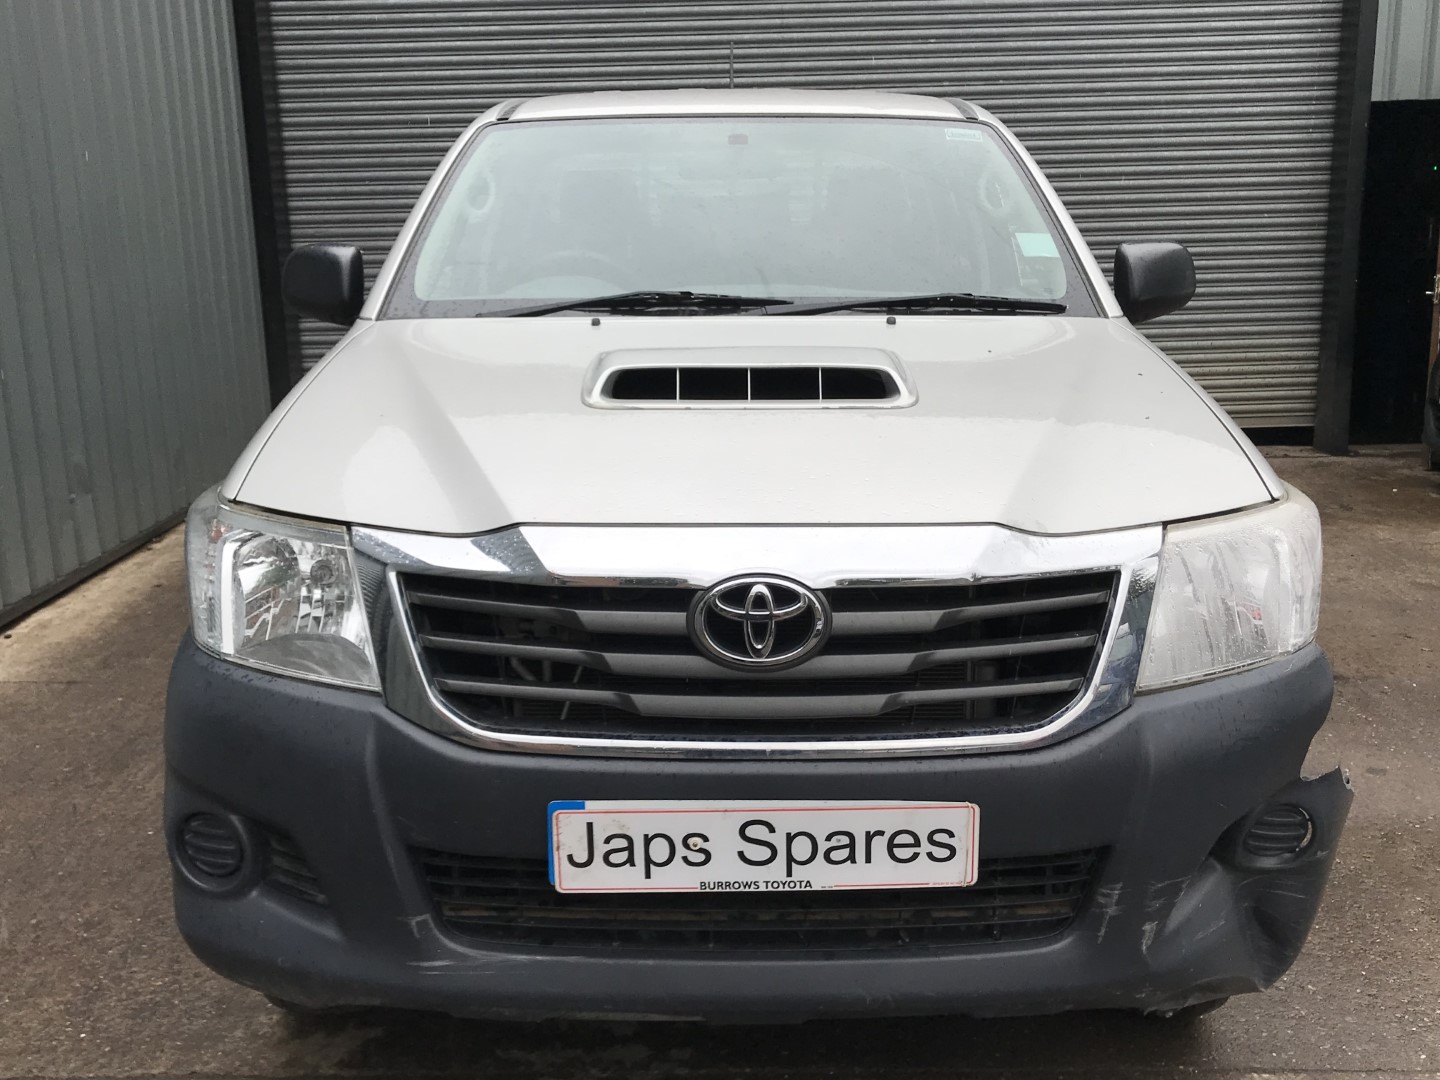 REF 274 TOYOTA HILUX DCB 2013 2.5D4D 5 SPEED MANUAL